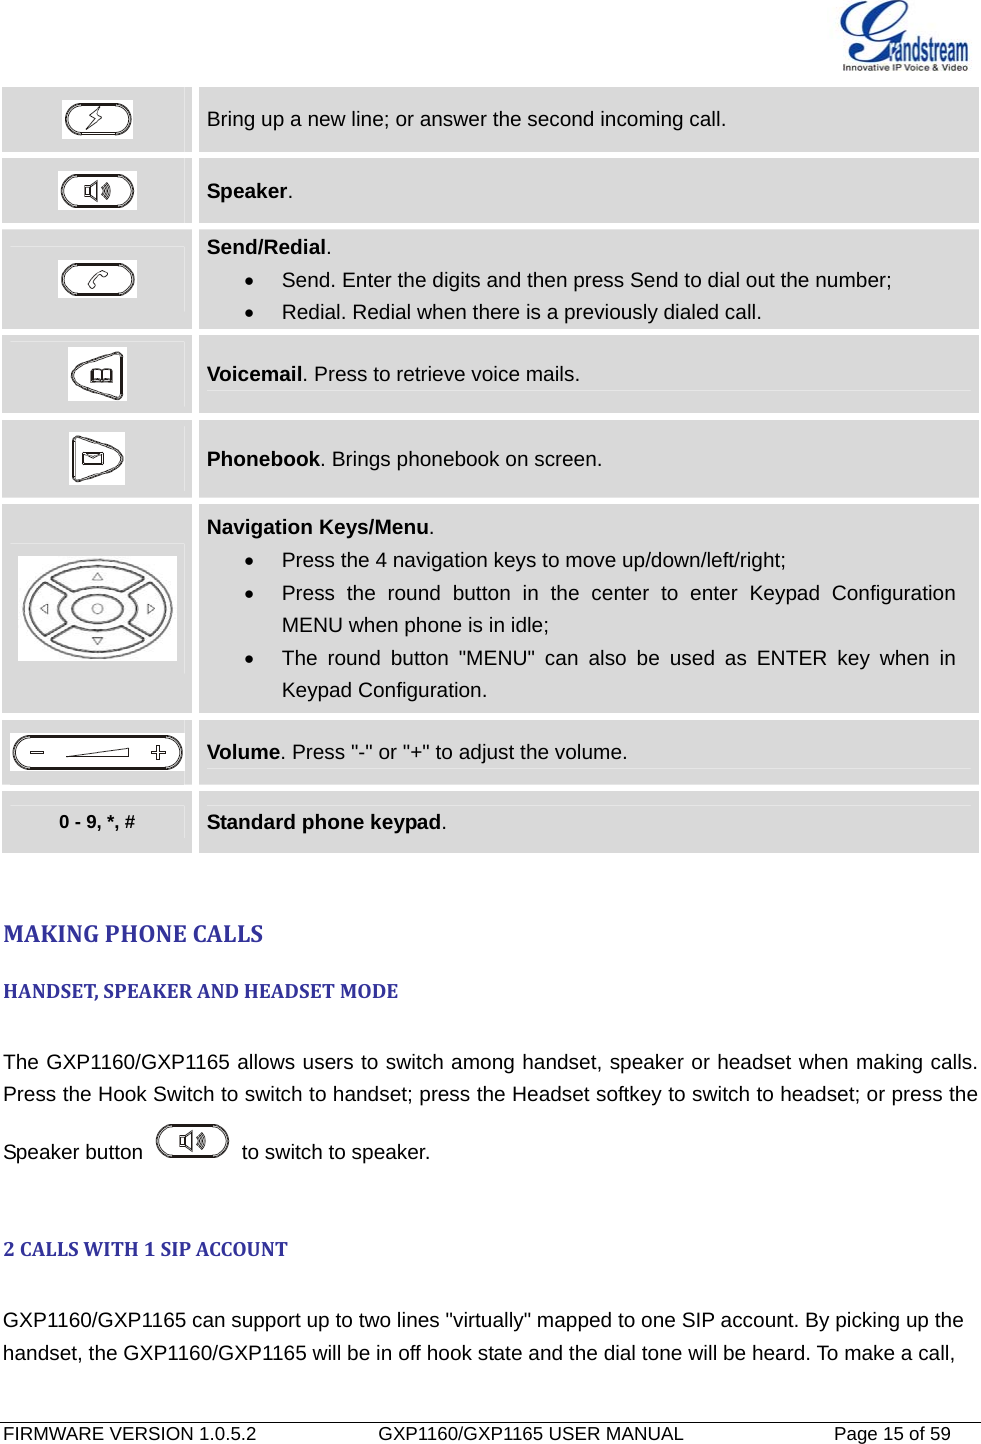   FIRMWARE VERSION 1.0.5.2             GXP1160/GXP1165 USER MANUAL           Page 15 of 59                                    Bring up a new line; or answer the second incoming call.  Speaker.  Send/Redial.    Send. Enter the digits and then press Send to dial out the number;   Redial. Redial when there is a previously dialed call.  Voicemail. Press to retrieve voice mails.  Phonebook. Brings phonebook on screen.  Navigation Keys/Menu.    Press the 4 navigation keys to move up/down/left/right;   Press the round button in the center to enter Keypad Configuration MENU when phone is in idle;   The round button &quot;MENU&quot; can also be used as ENTER key when in Keypad Configuration.  Volume. Press &quot;-&quot; or &quot;+&quot; to adjust the volume. 0 - 9, *, #  Standard phone keypad.  MAKINGPHONECALLSHANDSET,SPEAKERANDHEADSETMODE The GXP1160/GXP1165 allows users to switch among handset, speaker or headset when making calls. Press the Hook Switch to switch to handset; press the Headset softkey to switch to headset; or press the Speaker button    to switch to speaker.  2CALLSWITH1SIPACCOUNT GXP1160/GXP1165 can support up to two lines &quot;virtually&quot; mapped to one SIP account. By picking up the   handset, the GXP1160/GXP1165 will be in off hook state and the dial tone will be heard. To make a call,   